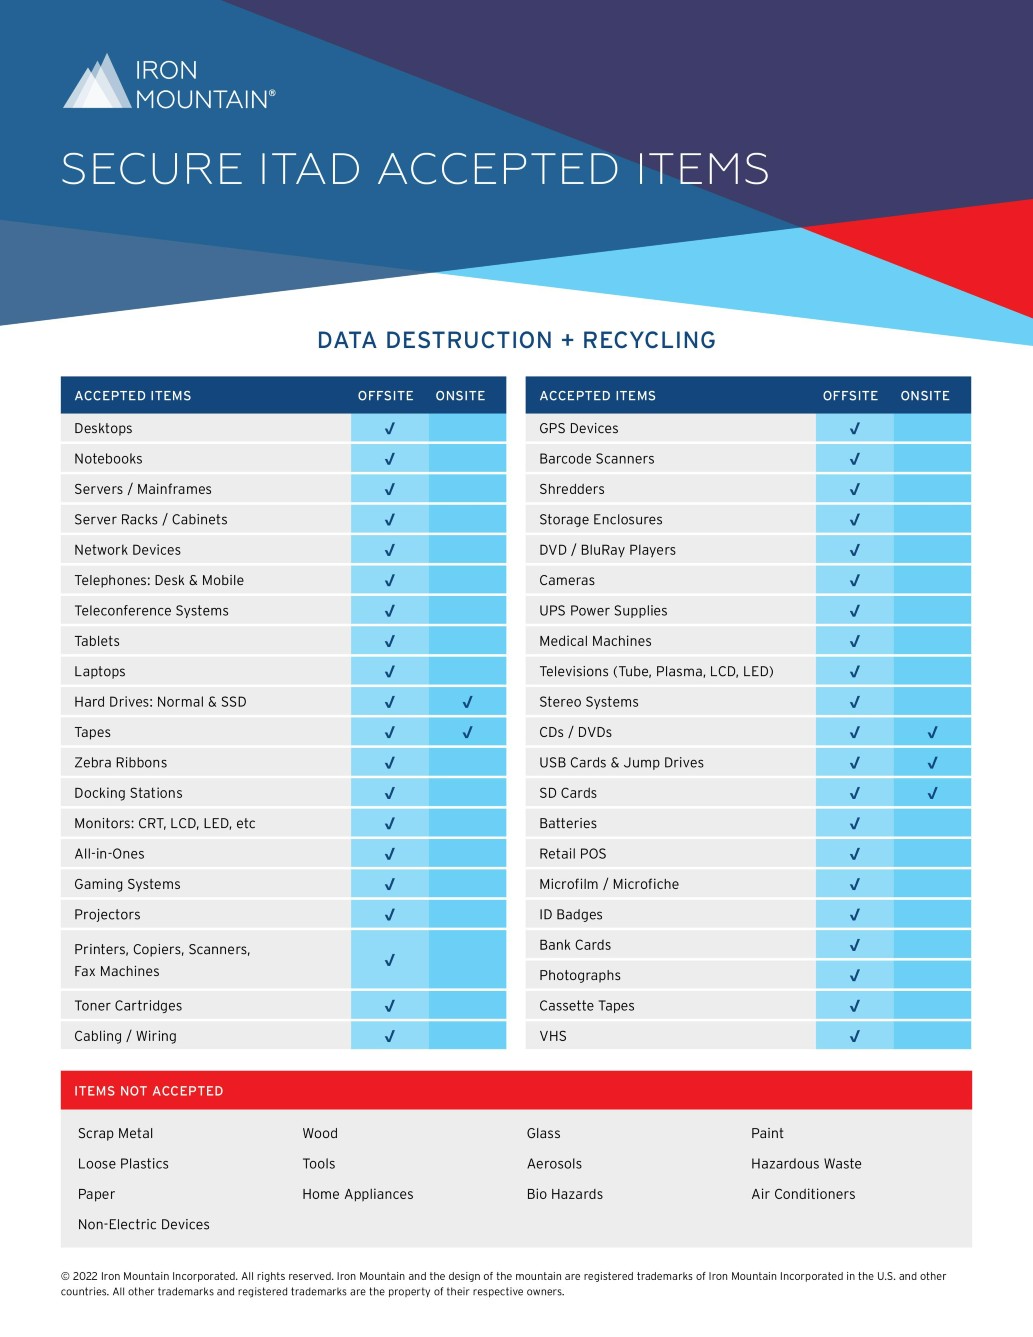 Secure ITAD Accepted Items - list